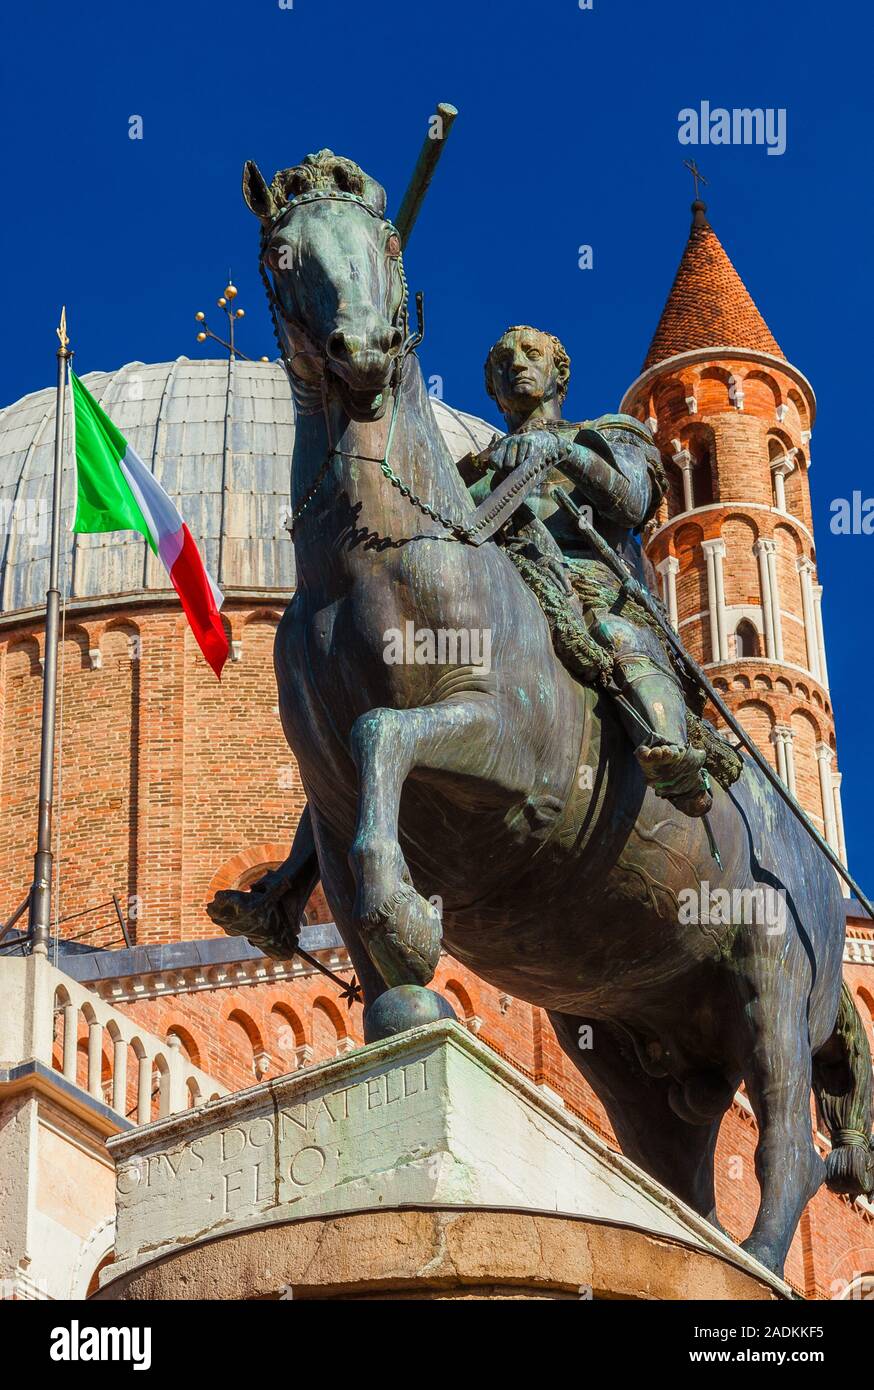 Gattamelata bronze equestrian statue in front of Basilica of Saint Anthony with Italian flag, in the historic center of Padua, erected by the famous r Stock Photo